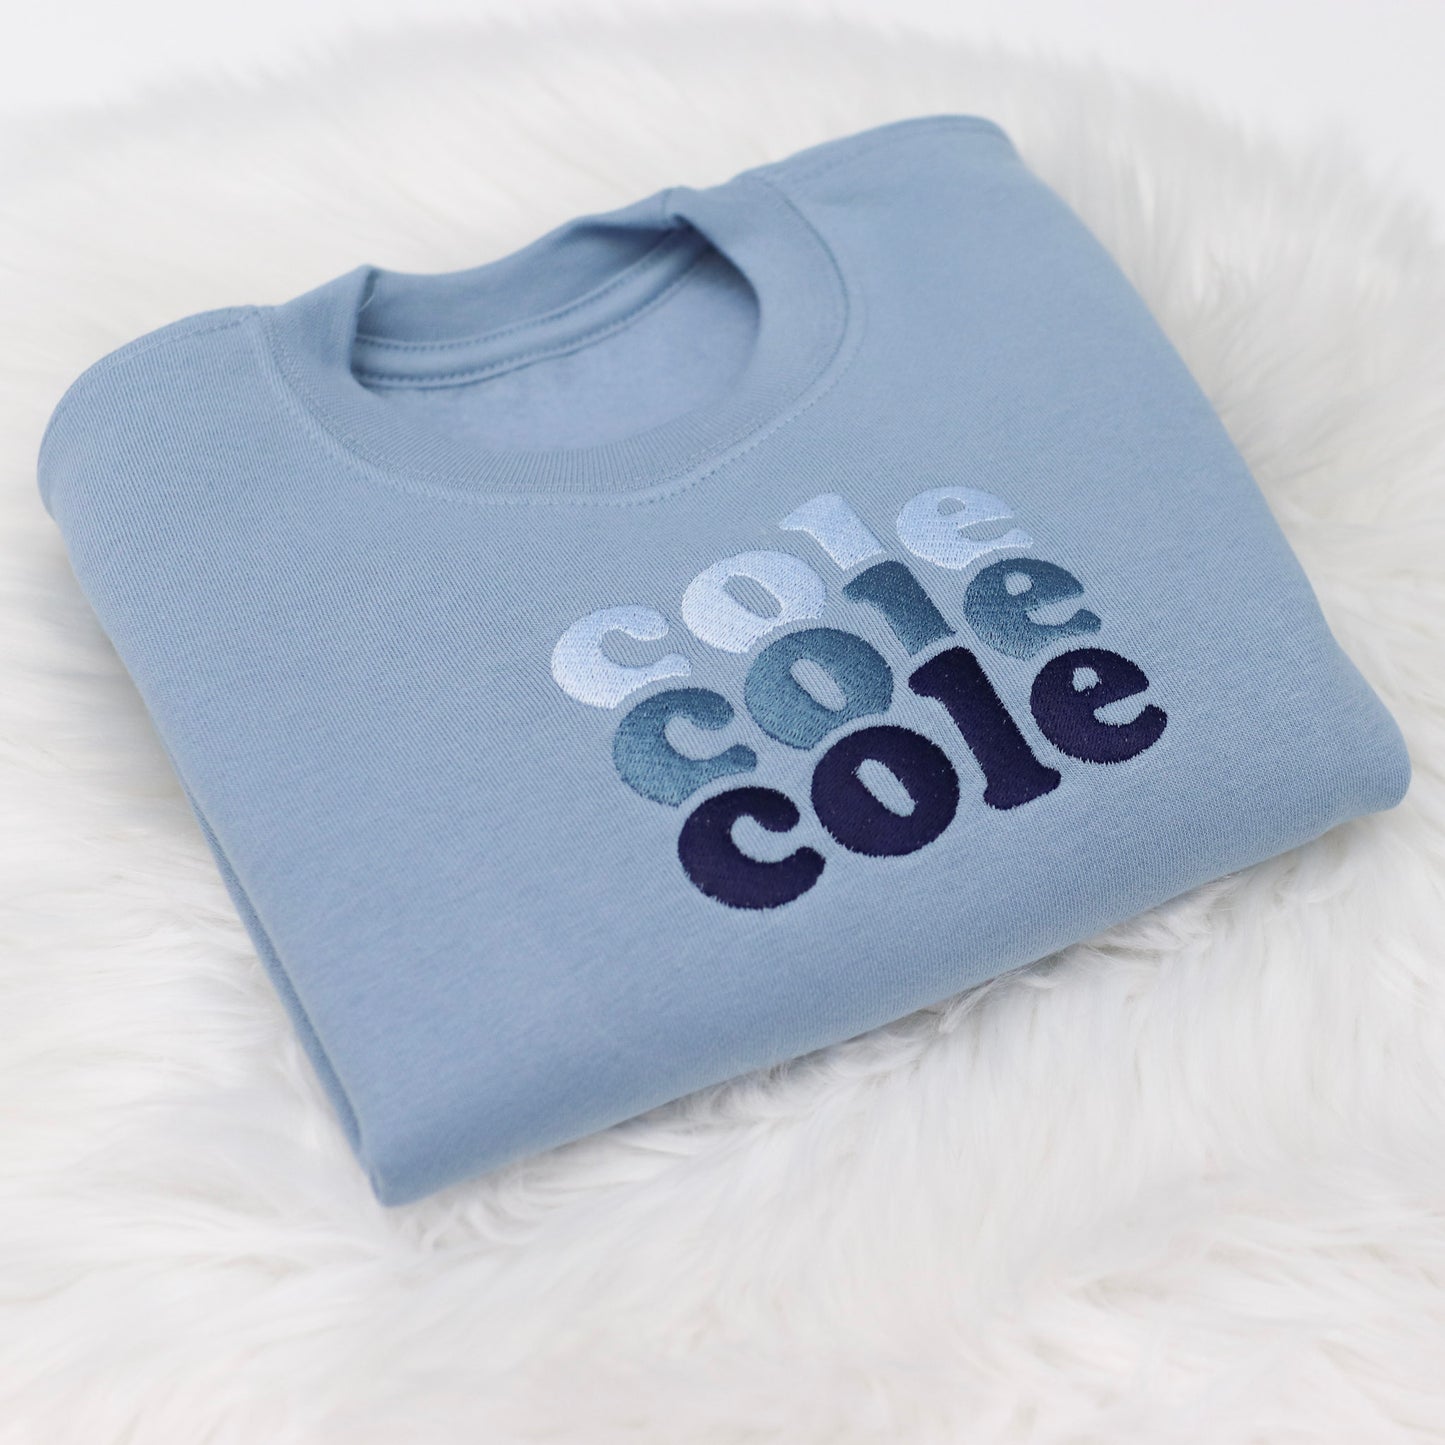 Dusty Blue | Baby Blue, Dusky Blue, Navy | Triple Name Embroidered Soft Style Sweatshirt